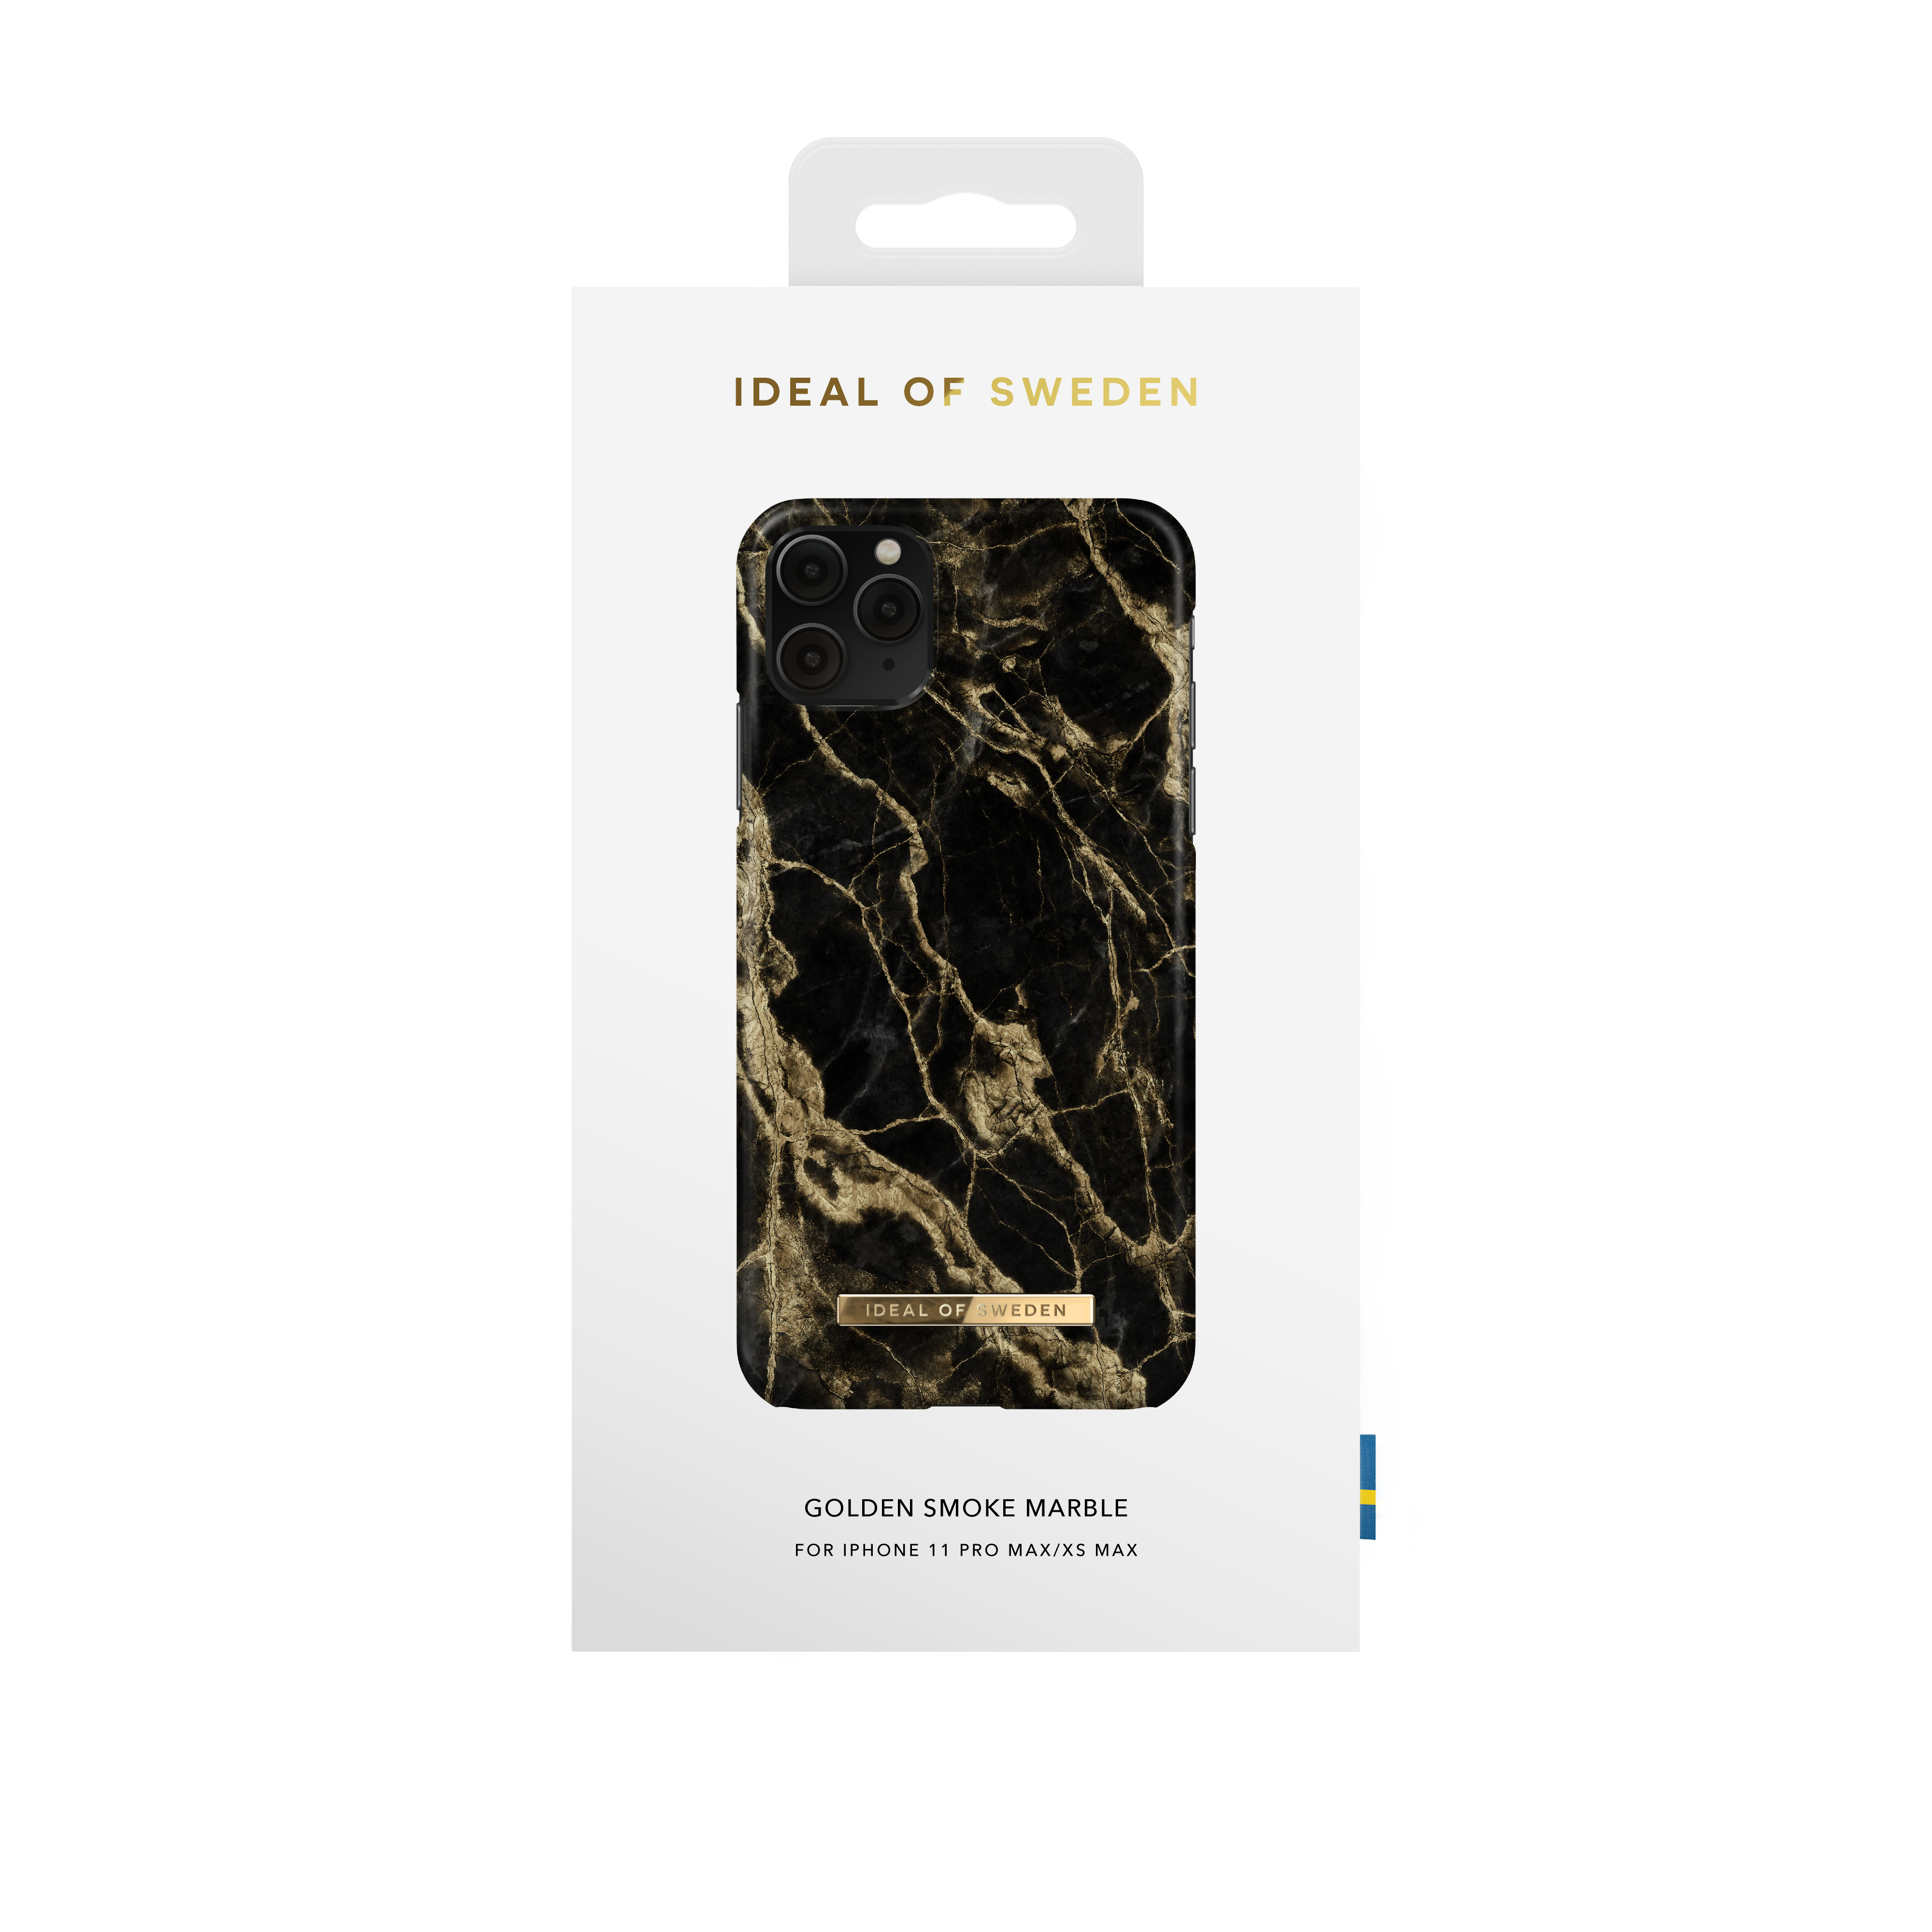 XS Smoke Marble IDEAL Backcover, Max, OF SWEDEN Golden iPhone 11 Max, iPhone IDFCSS20-I1965-191, Apple, Pro